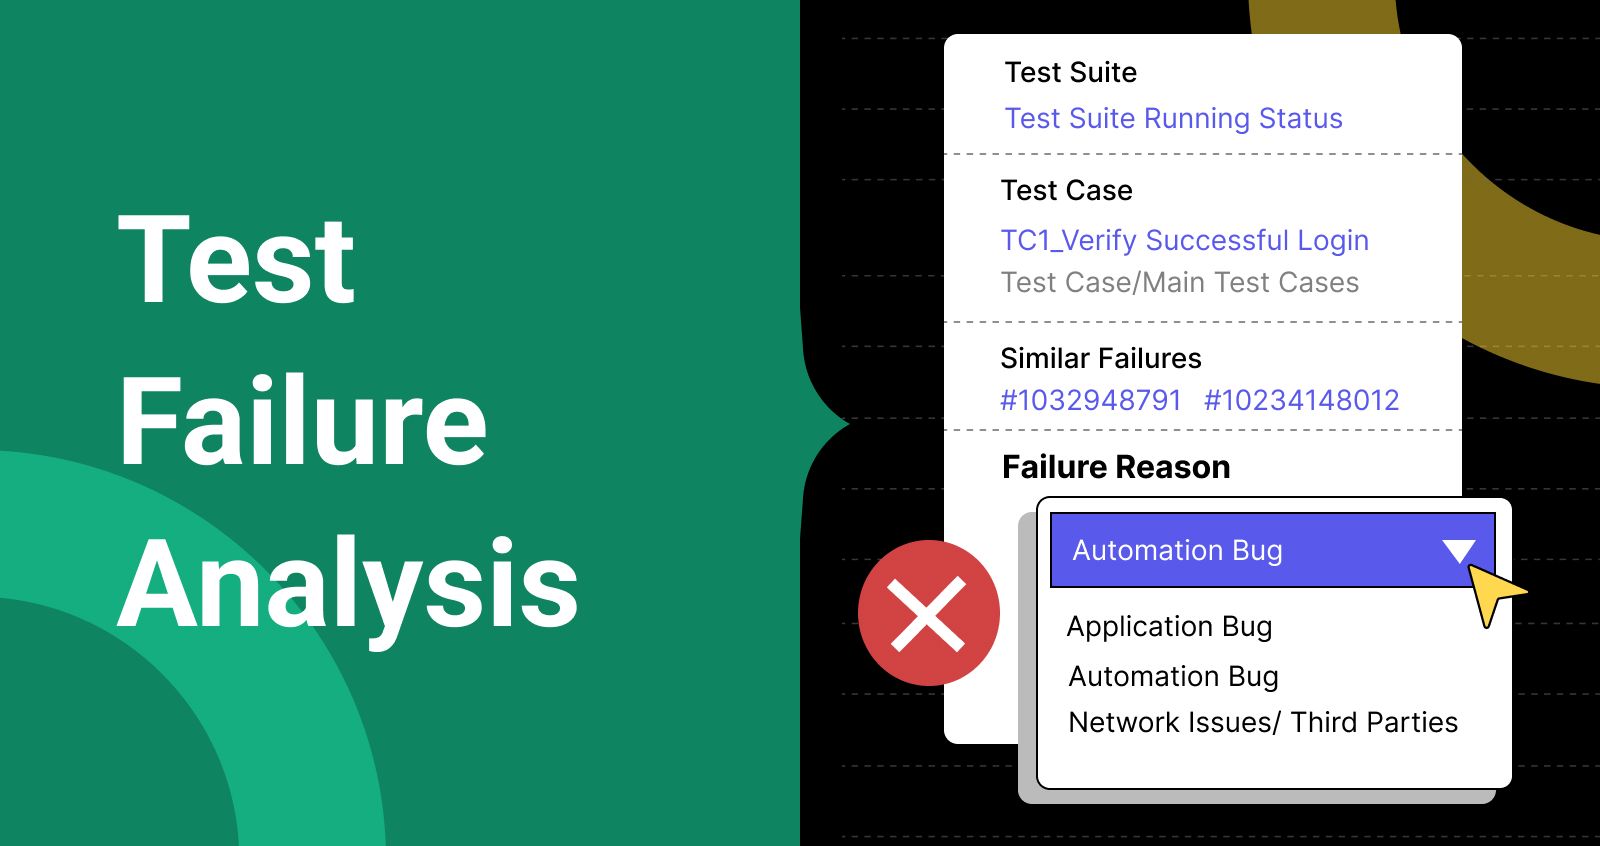 Streamline Test Failure Analysis for Quality Engineering Teams